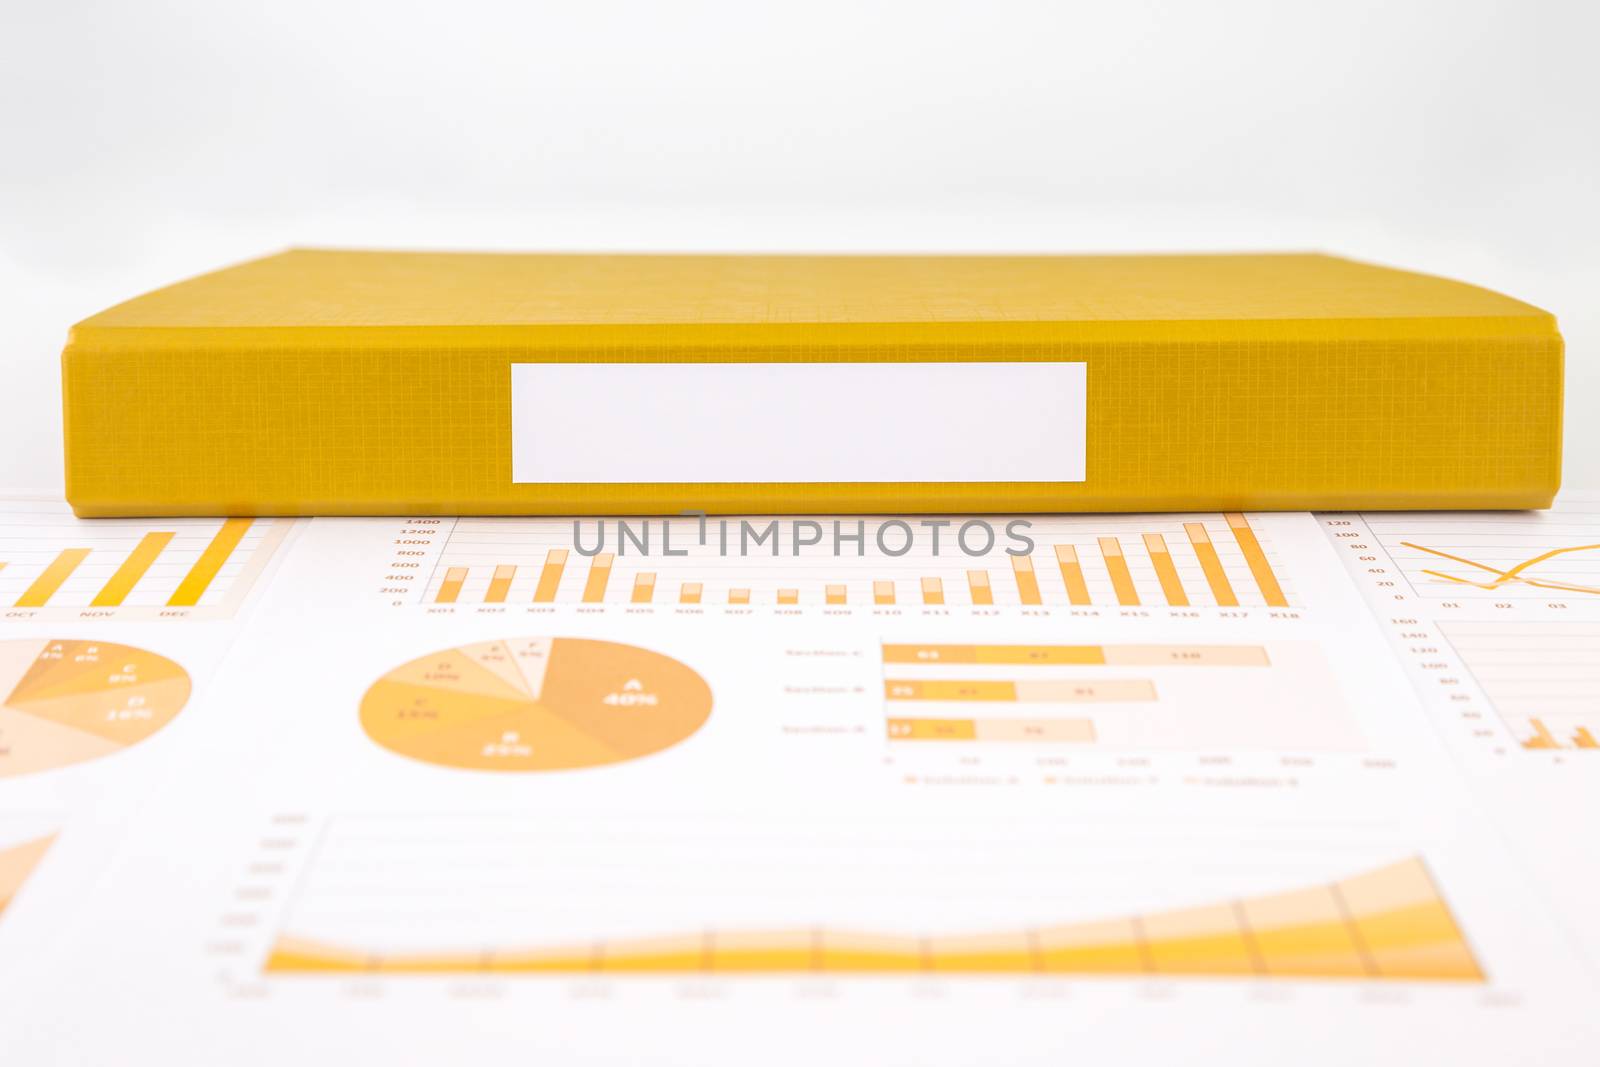 Blank label of yellow document file with chart, business graph and summary 
reports